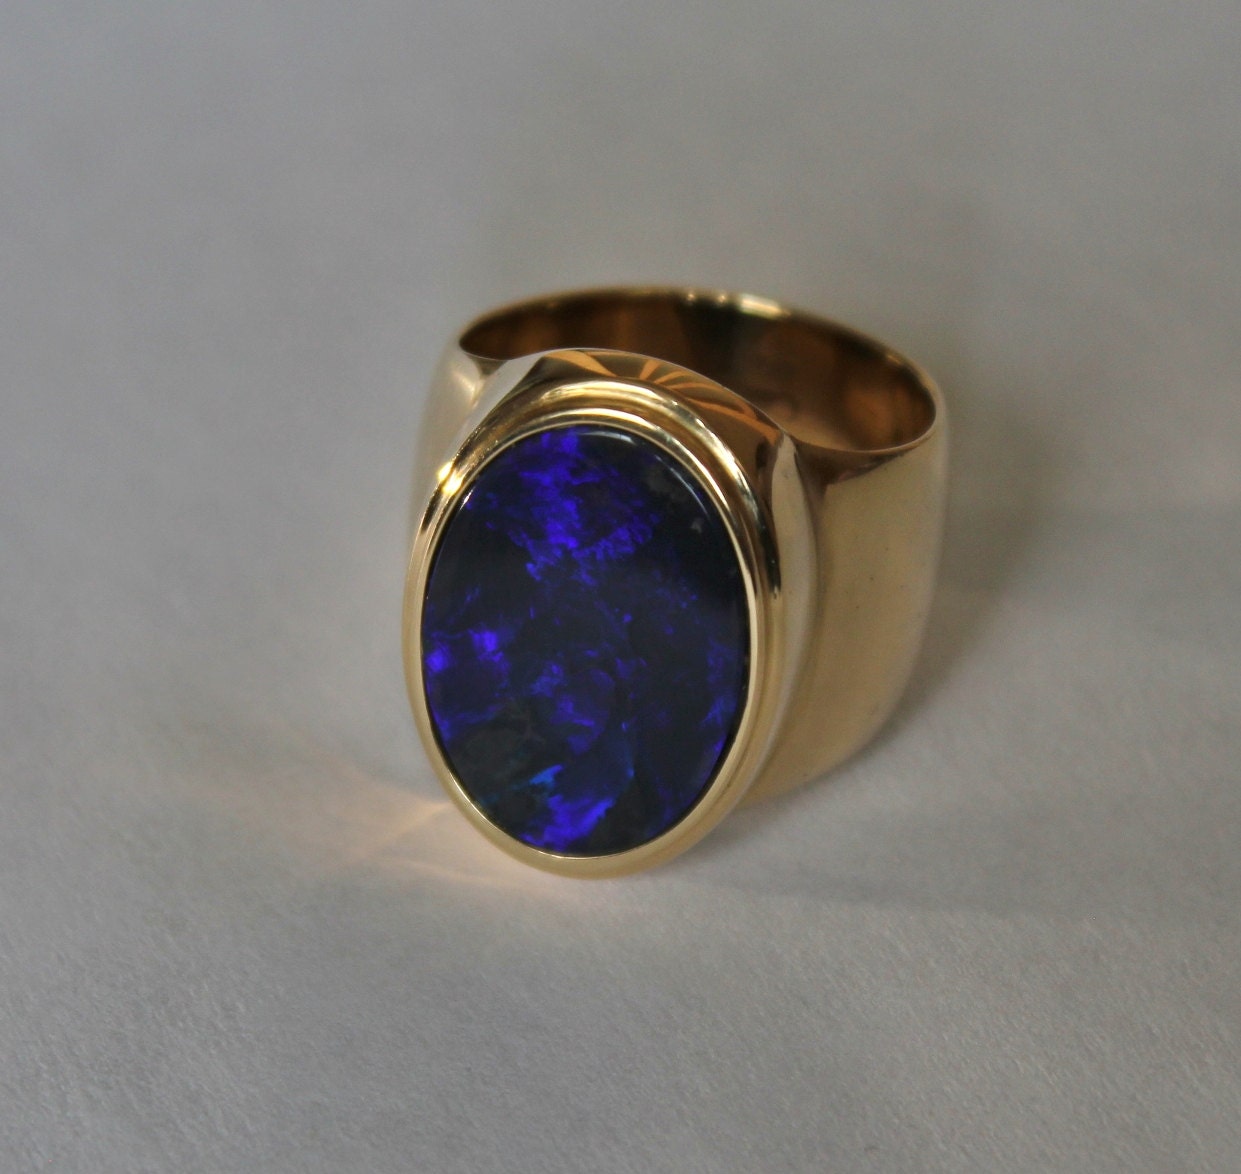 Handmade Black Opal Mens Ring in 14 k solid yellow gold size